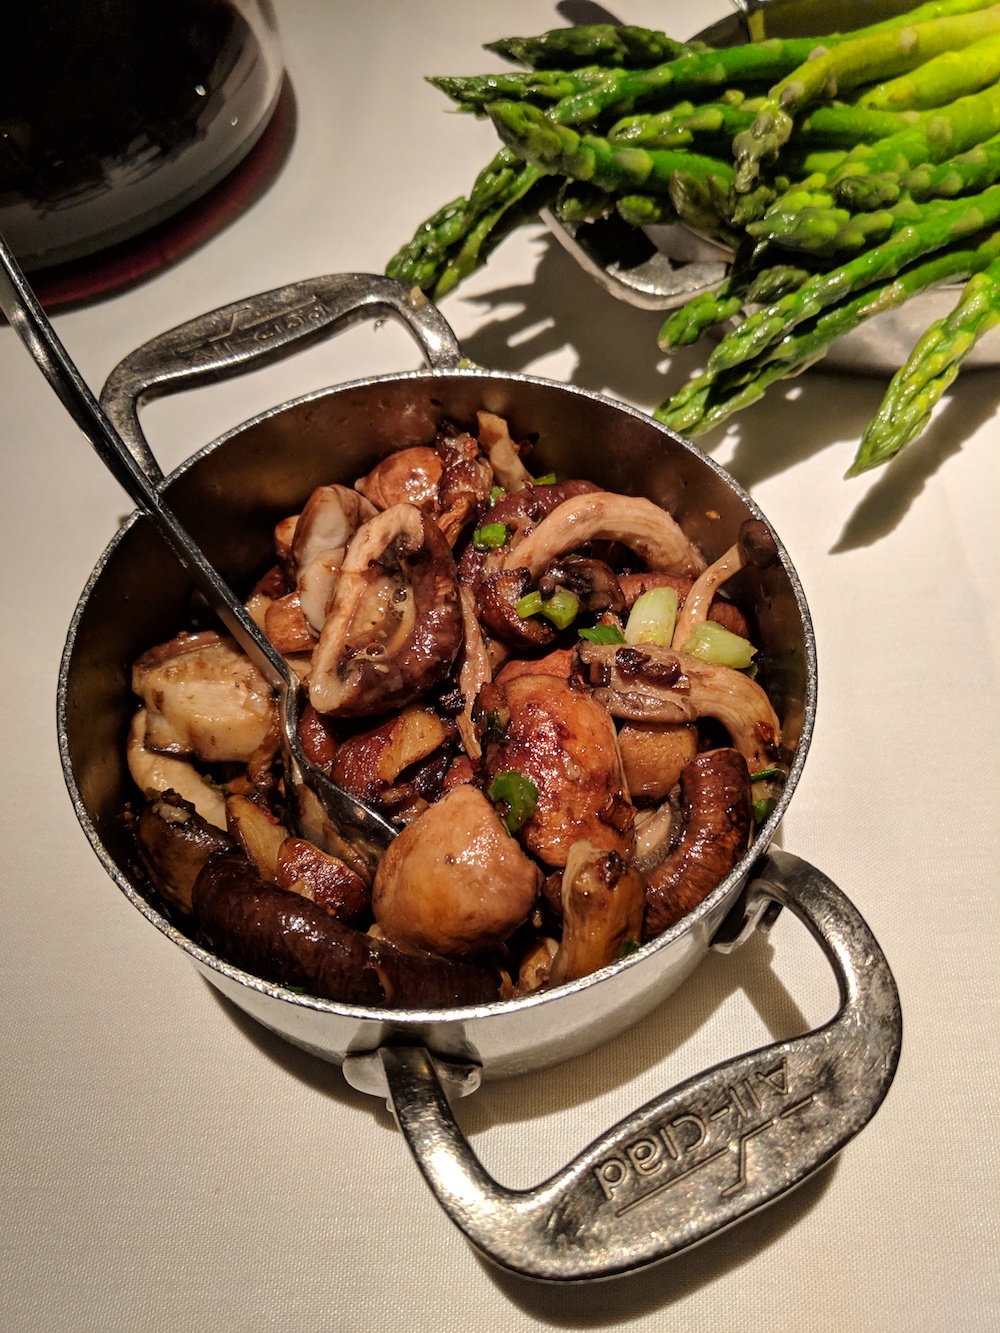 Lovely sides, buttered fresh asparagus and sauteed garlic mushrooms